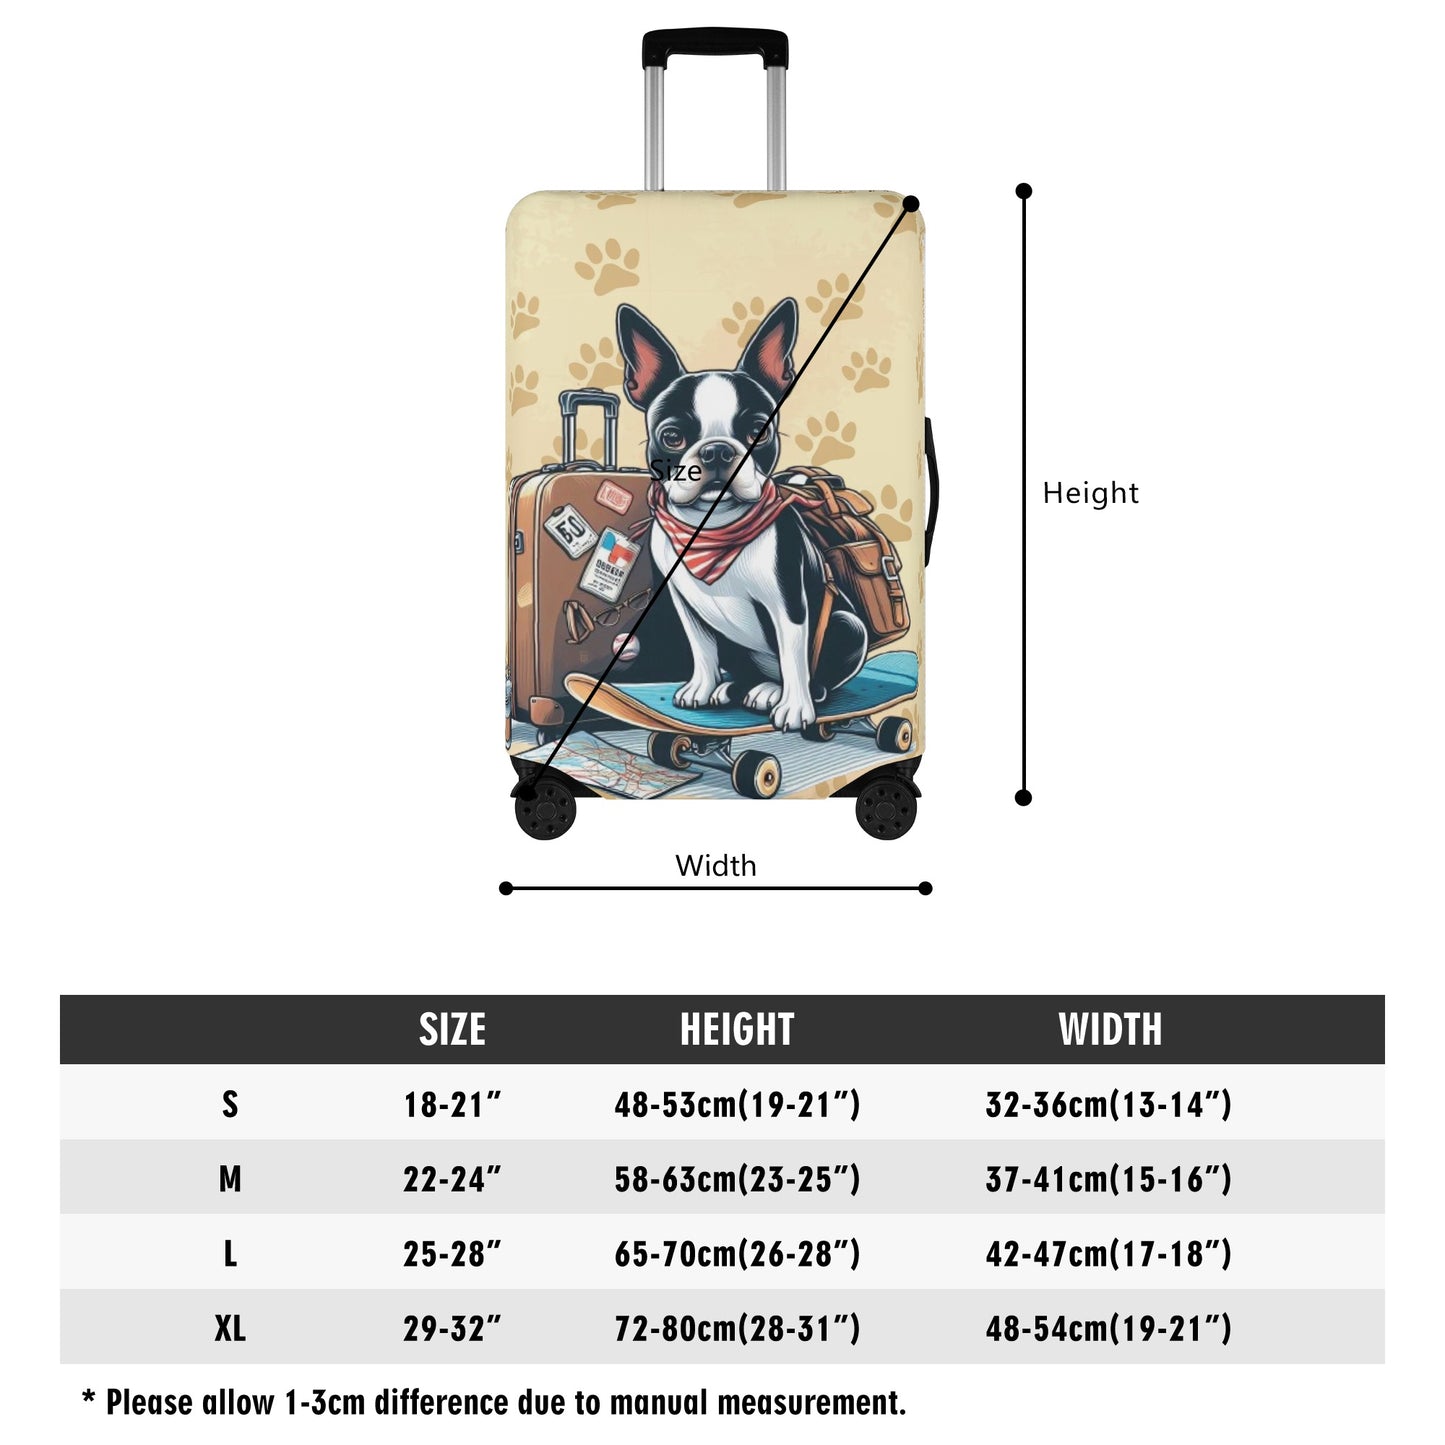 Birdie - Luggage Cover for Boston Terrier lovers